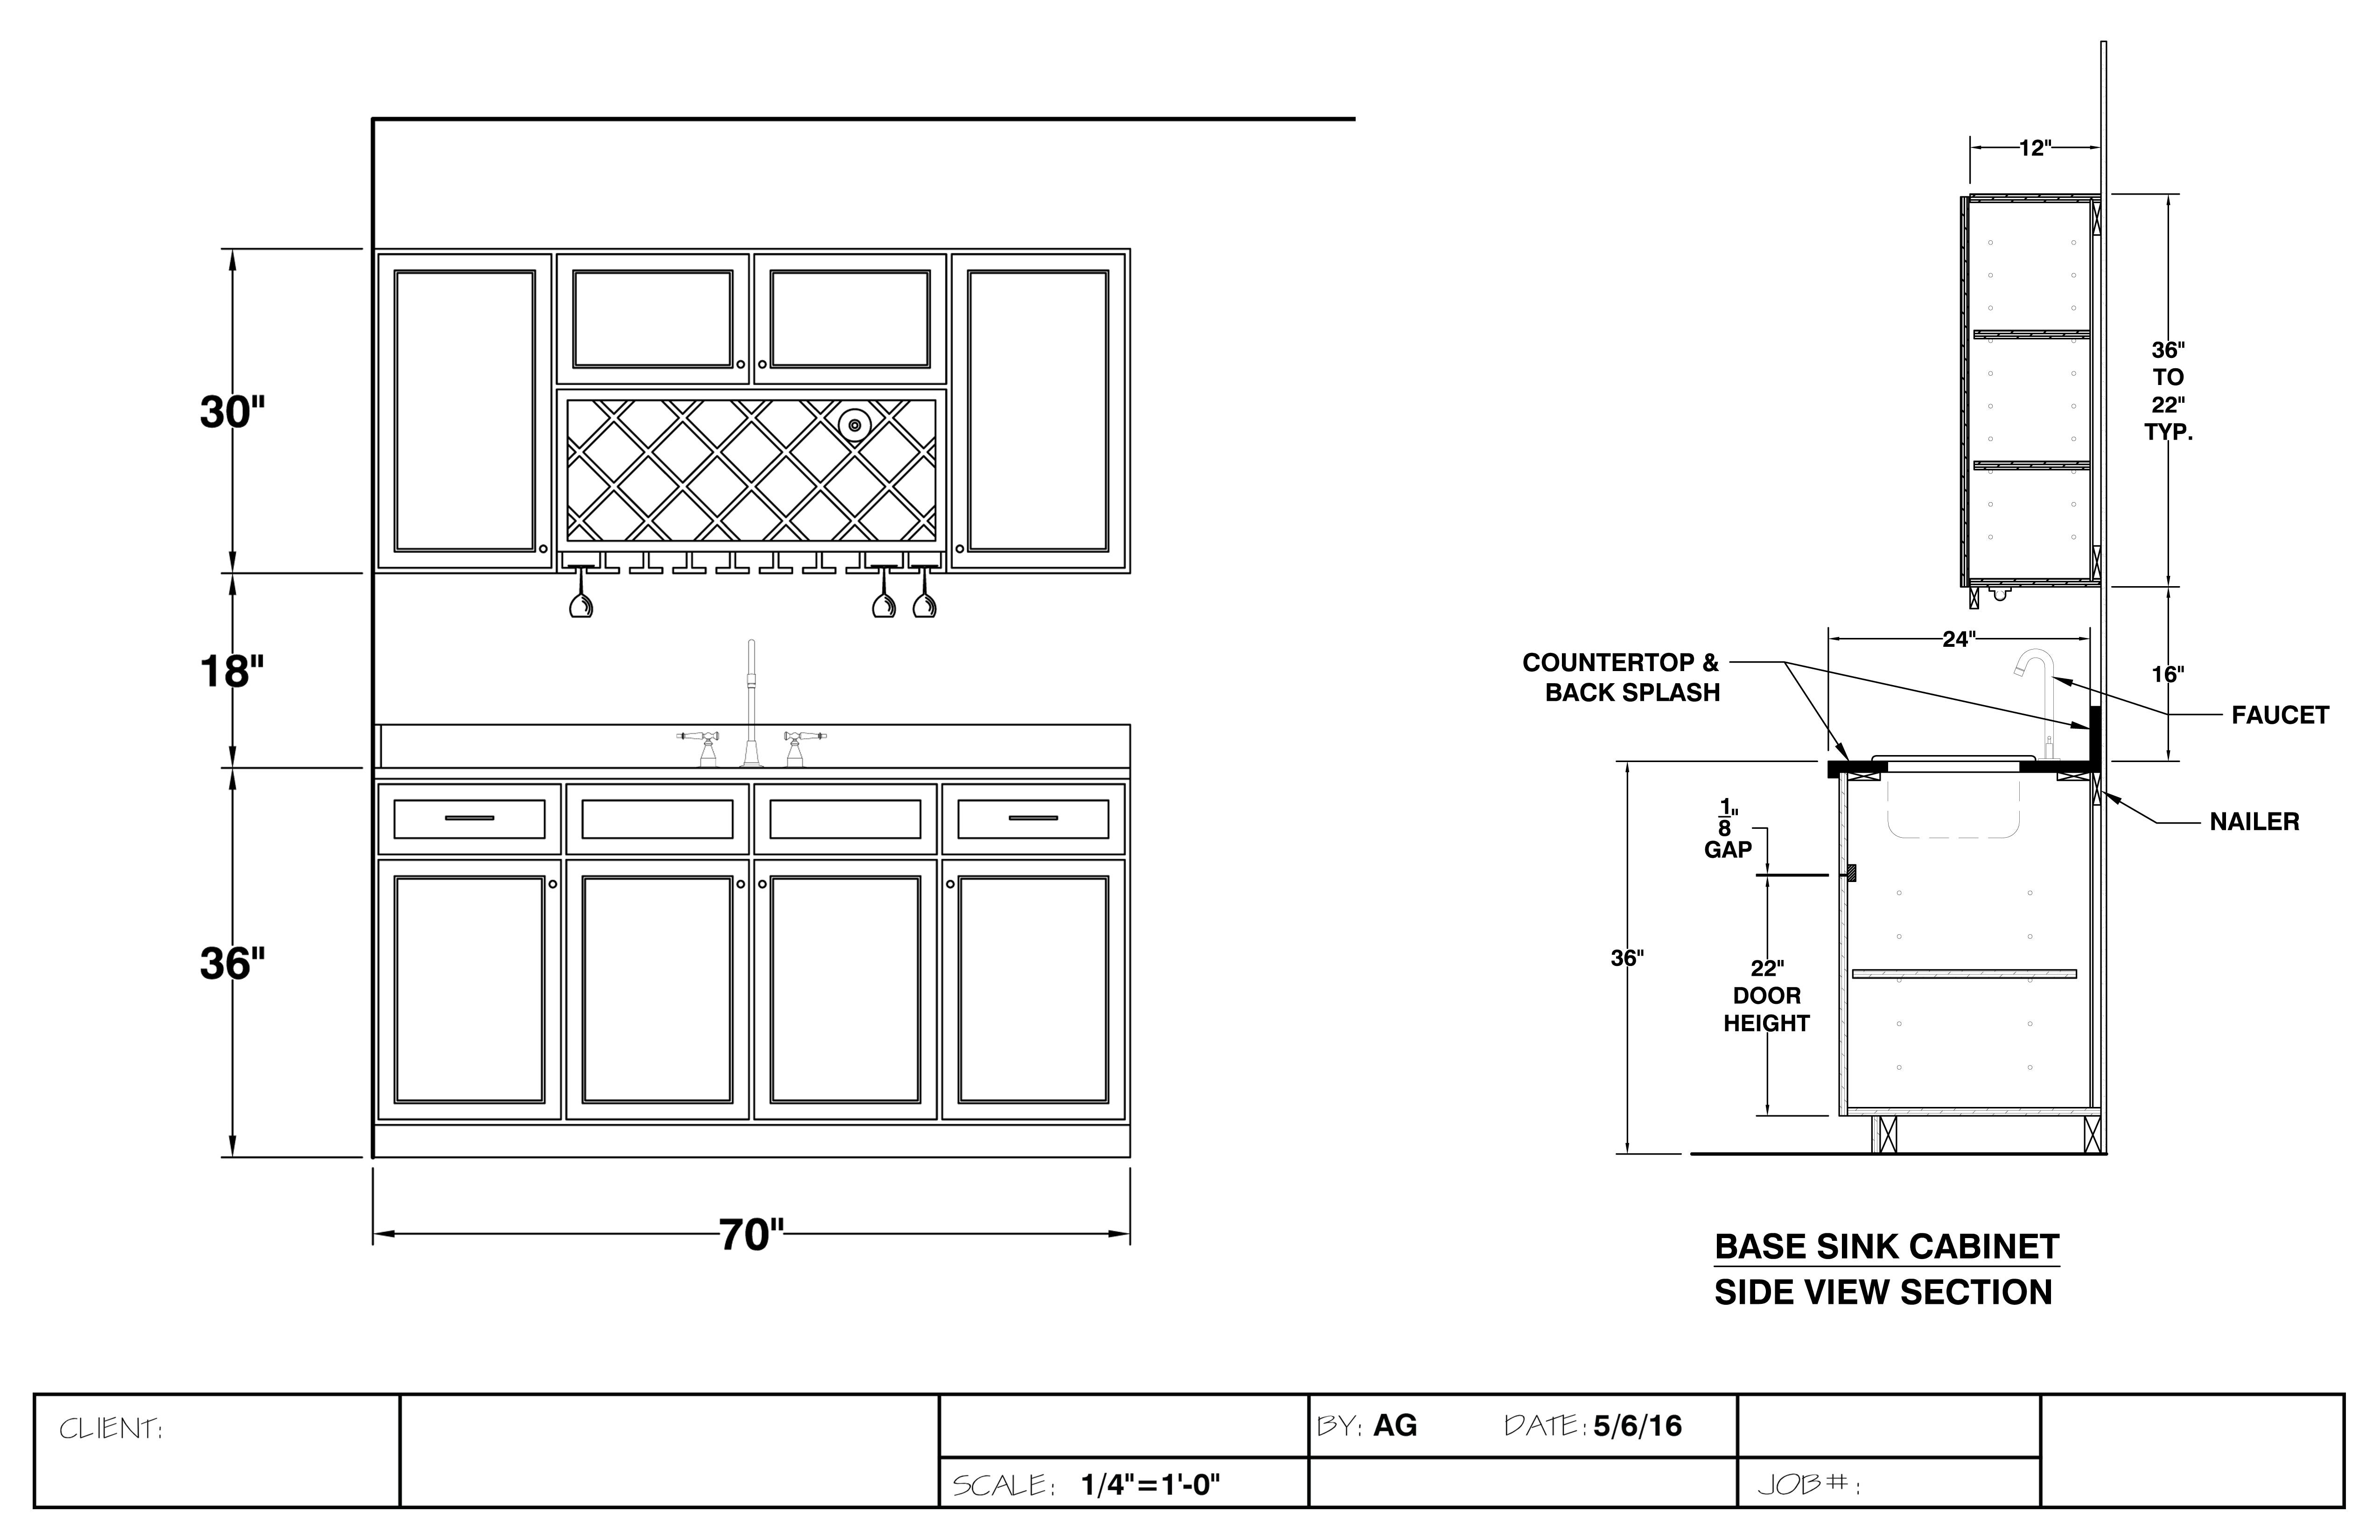 Millwork, casework cabinet and interior design shop drawings | Andrew